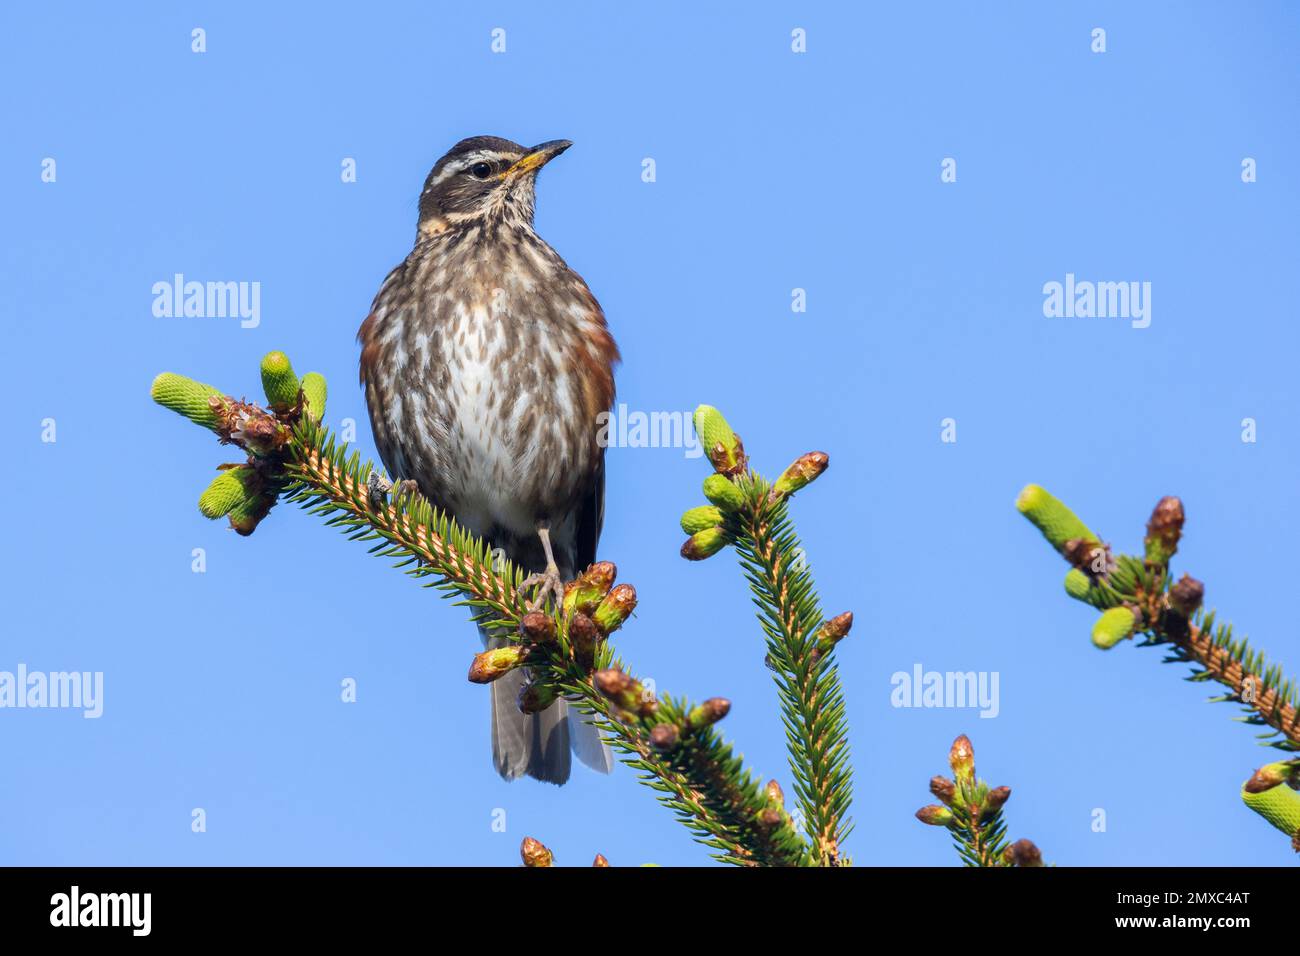 Redwing (Turdus iliacus), adult perched on a Spruce tree, Capital Region, Iceland Stock Photo